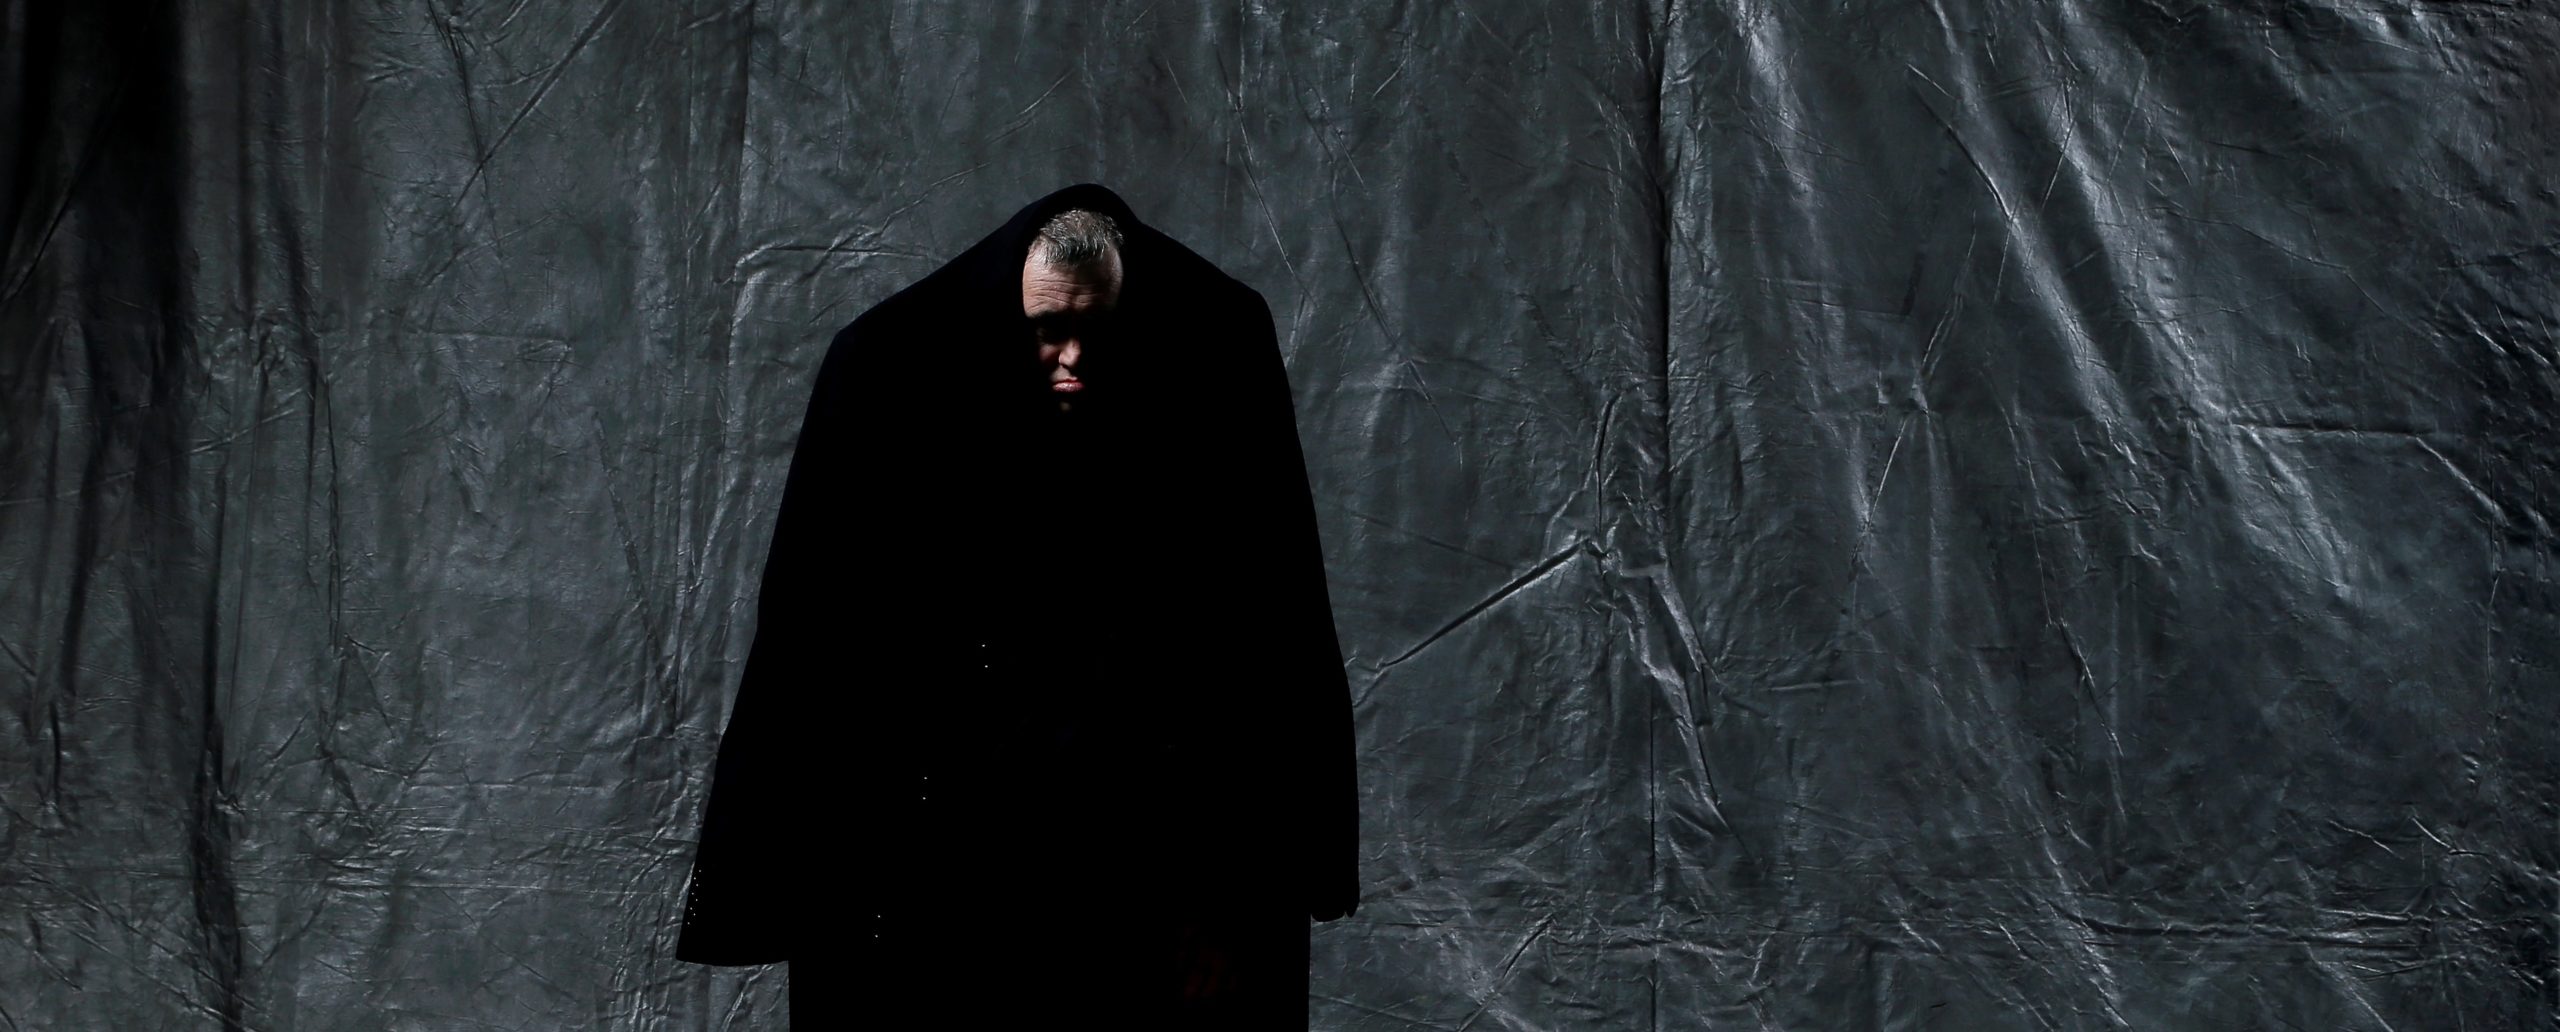 Entity - Back 2 Back Theatre - A man with curly grey hair on top of his head stands against a background of wrinkled dark grey fabric. He is barefoot and is wearing dark pants and an oversized coat. The coat is pulled up over his head and he has a sad expression on his face.